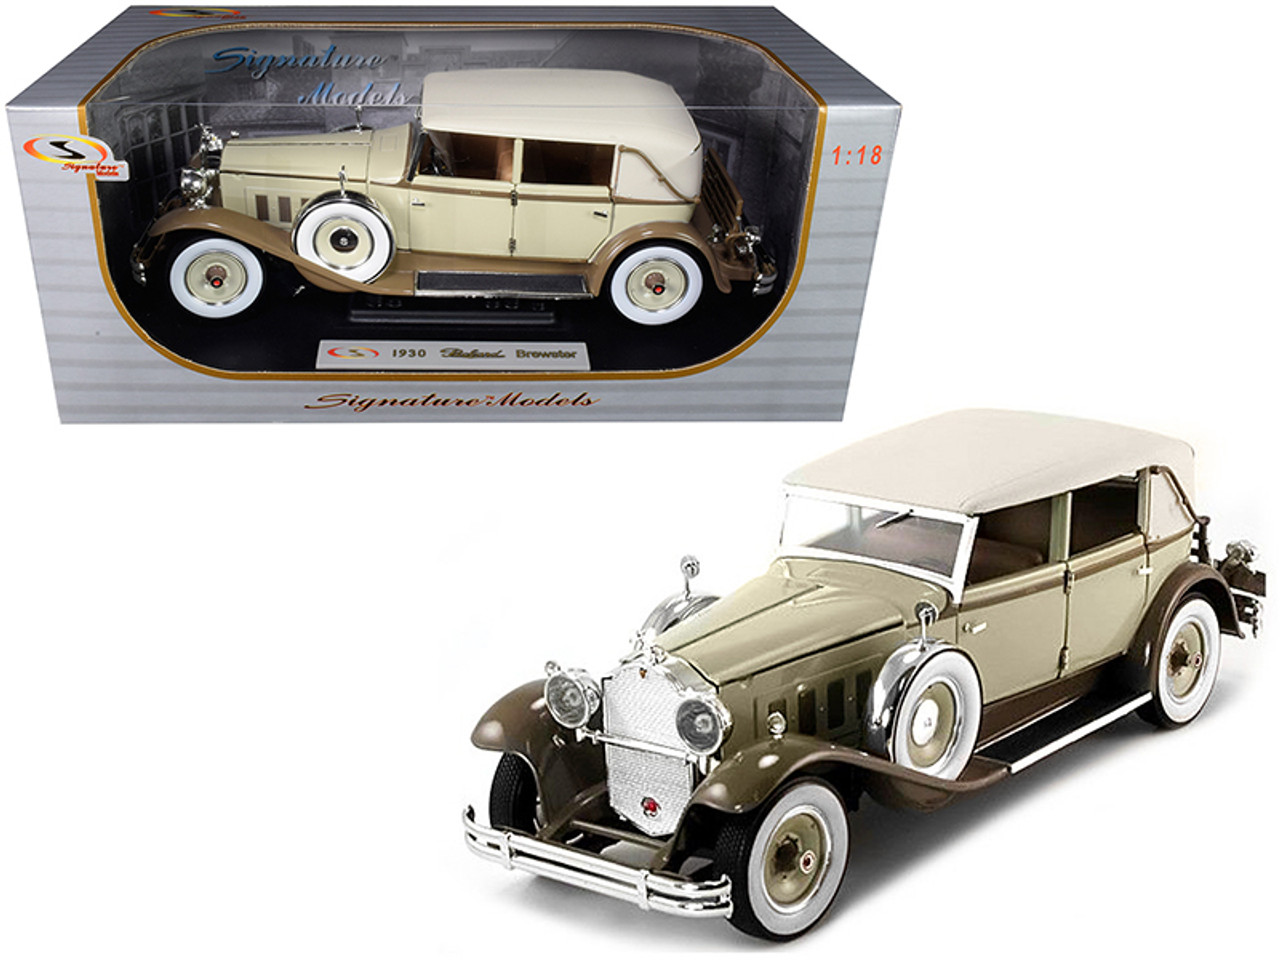 1/18 Road Signature 1930 Packard Brewster (Tan and Coffee Brown) Diecast Model Car